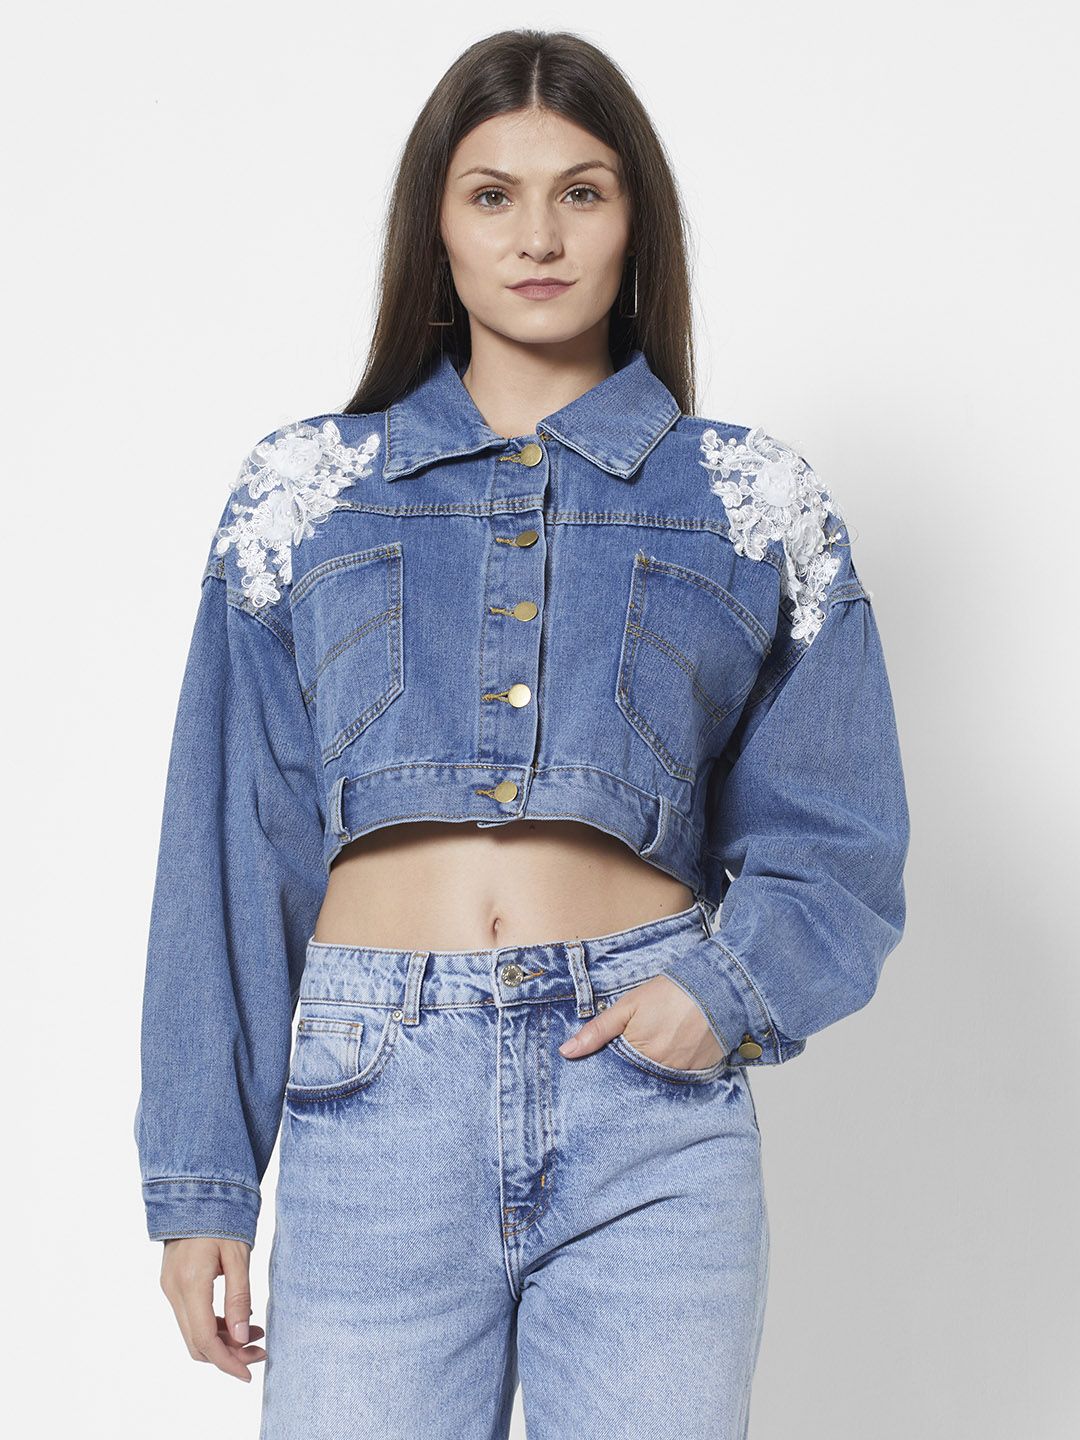 URBANIC Women Navy Blue Crop Denim Jacket With Lace Inserts Price in India